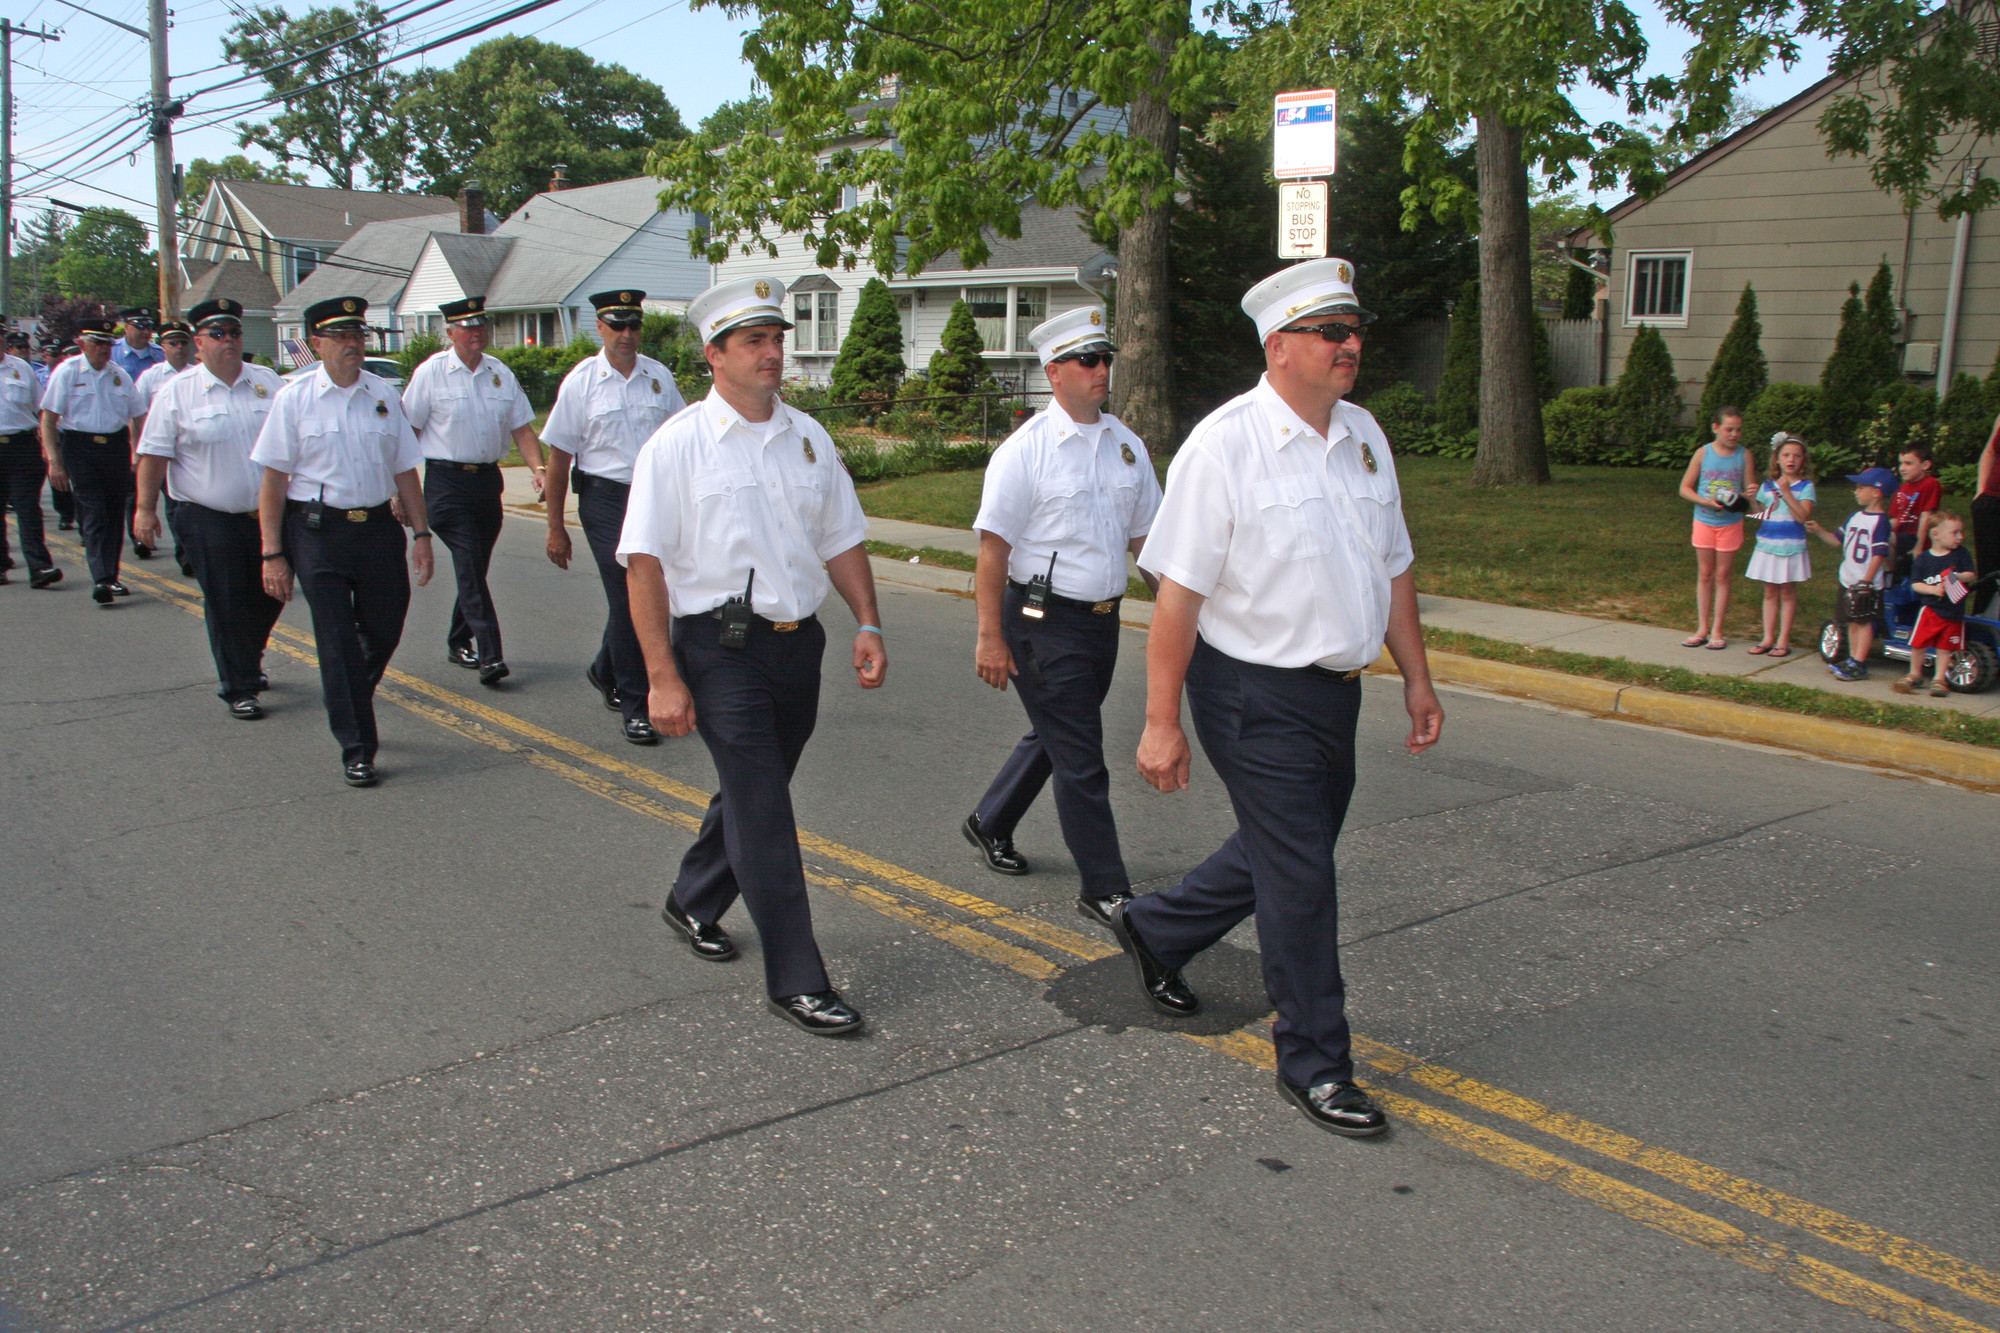 The Seaford Fire Department was led by Chief Bob Podesta, First Assistant Chief Keith Kern and Second Assistant Chief Mike Bellissimo.